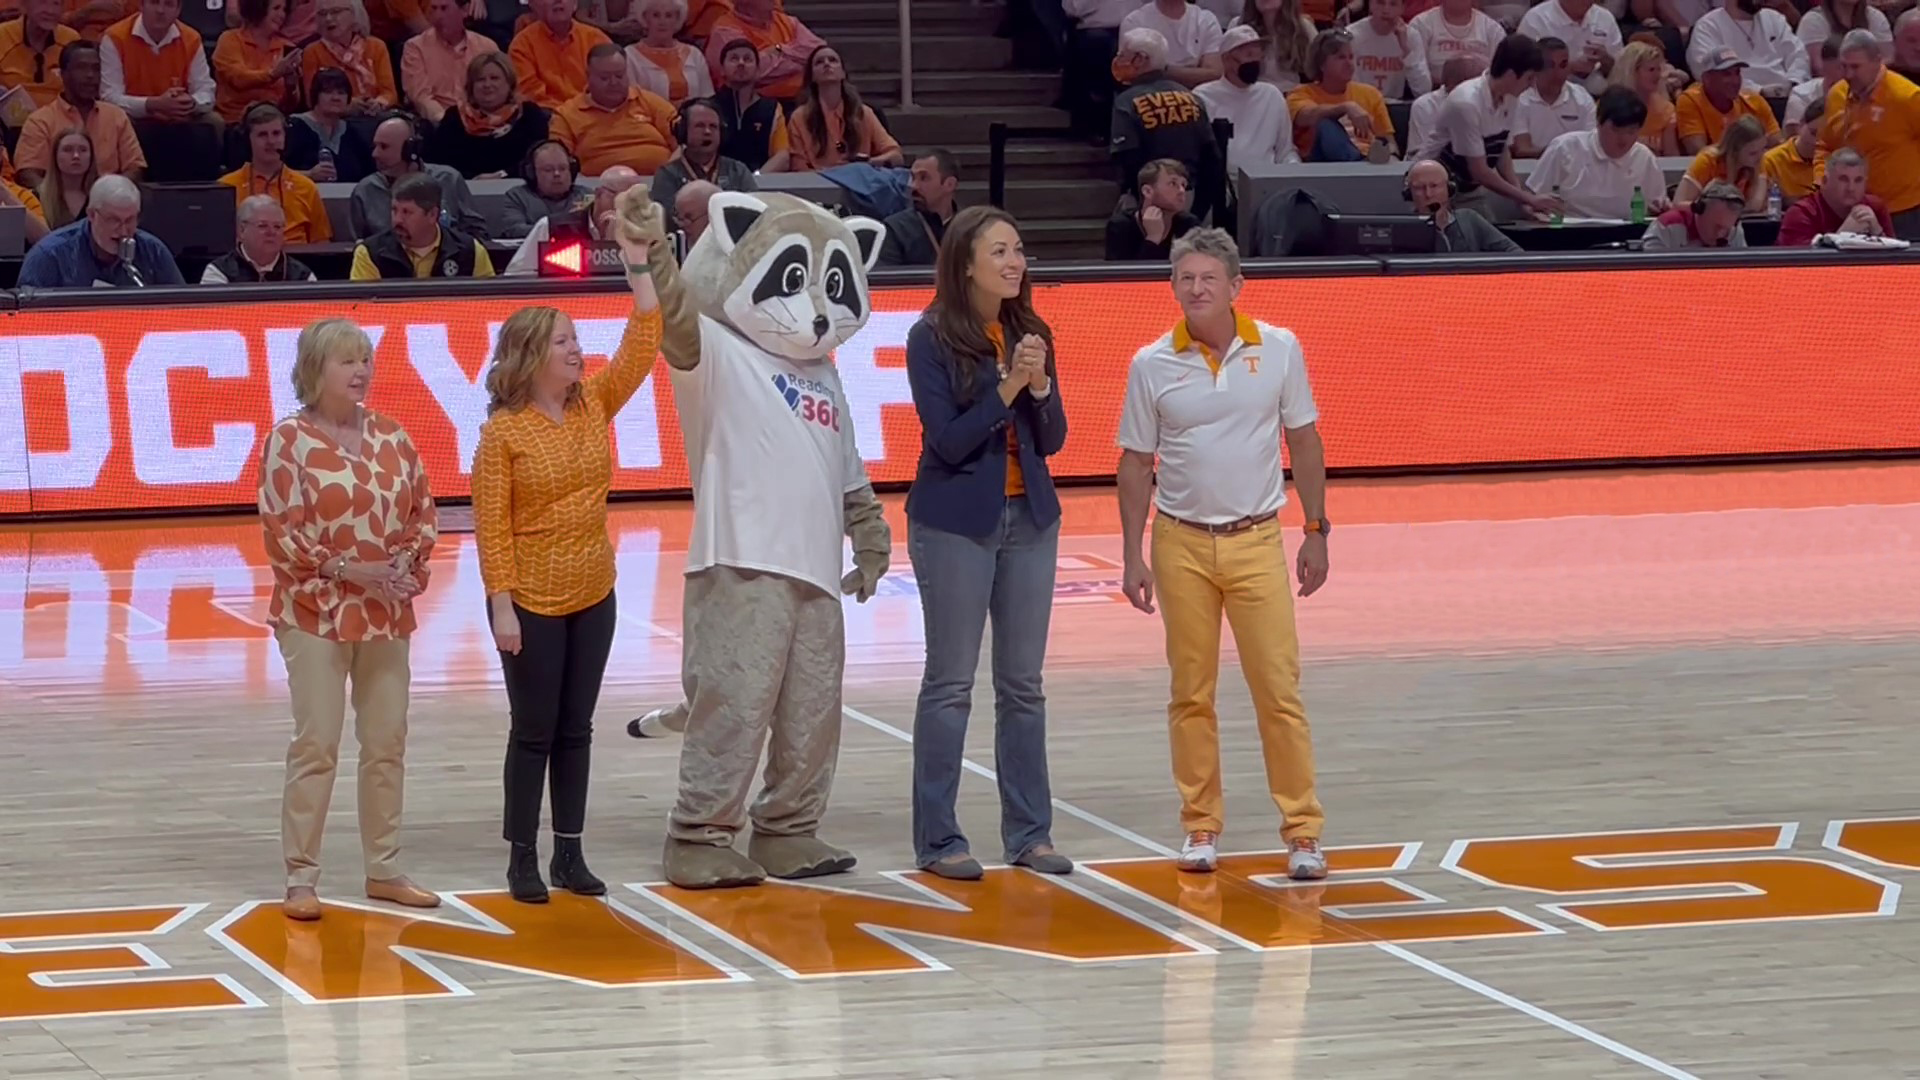 Image of Sherry Bell, UTK Director of Literacy Initiatives, 2020-21 TN Teacher of the Year Kami Lunsford, Riley the Reading Raccoon, TN Commissioner Penny Schwinn, and UT President Randy Boyd